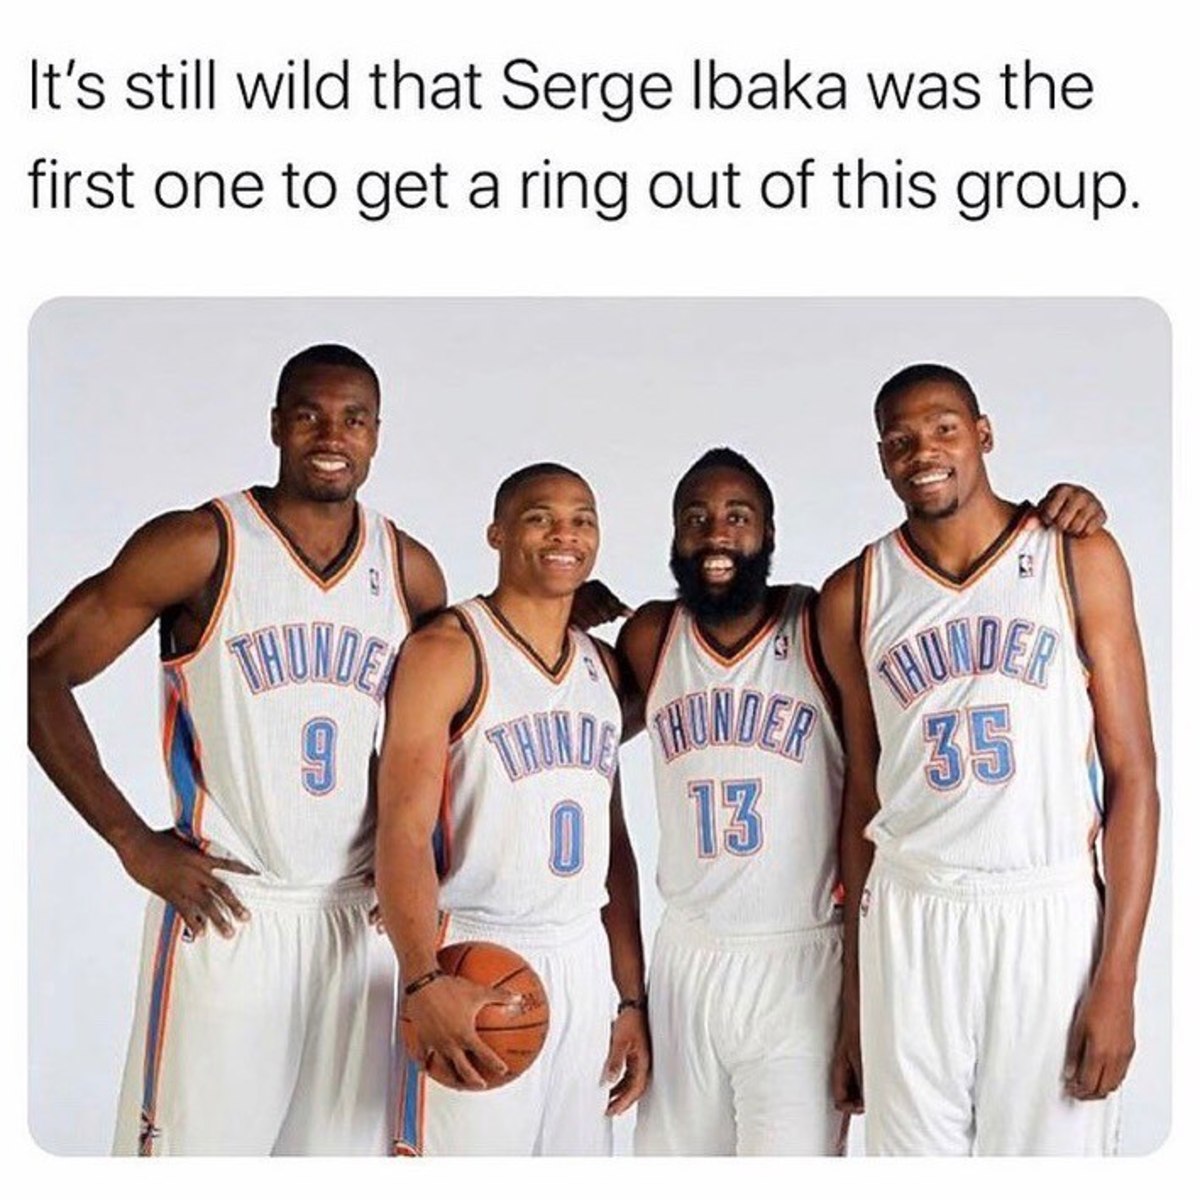 Credit: Just Another NBA Fan